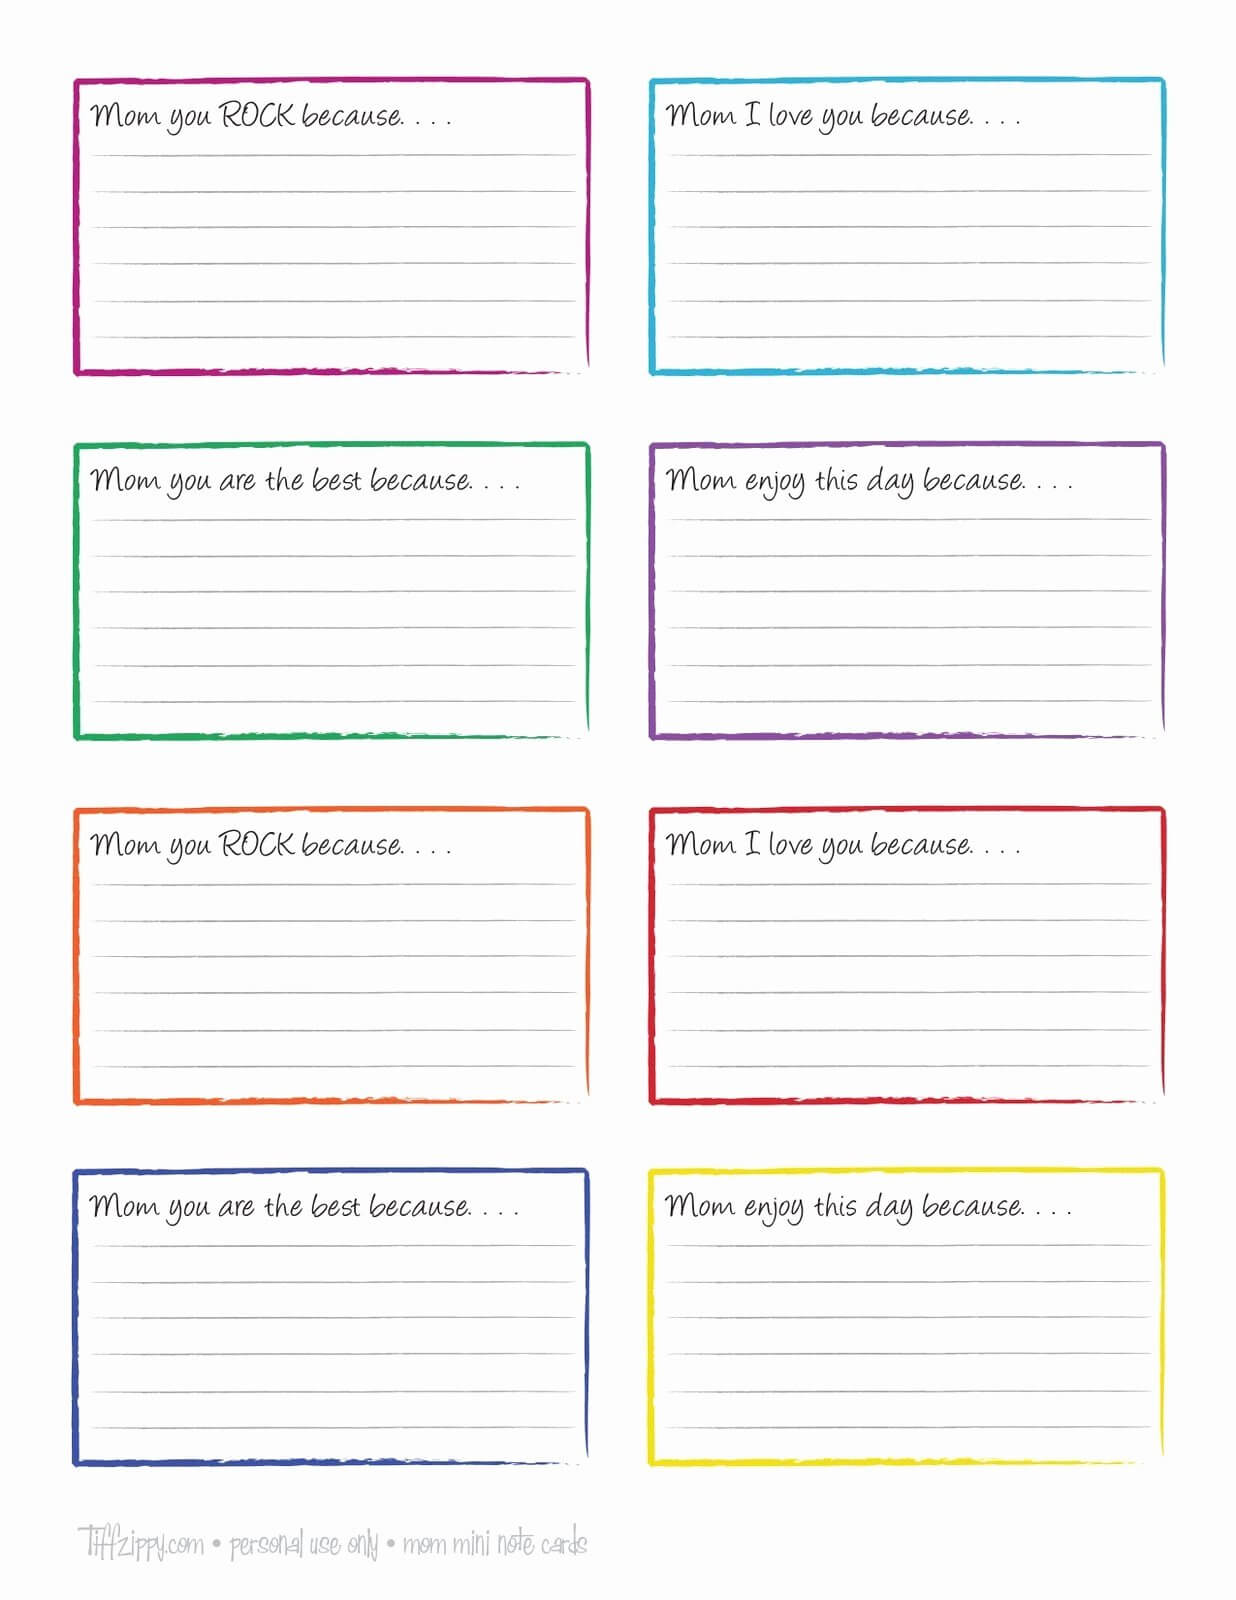 30 Note Card Template Google Docs | Pryncepality For Index Card Template For Word